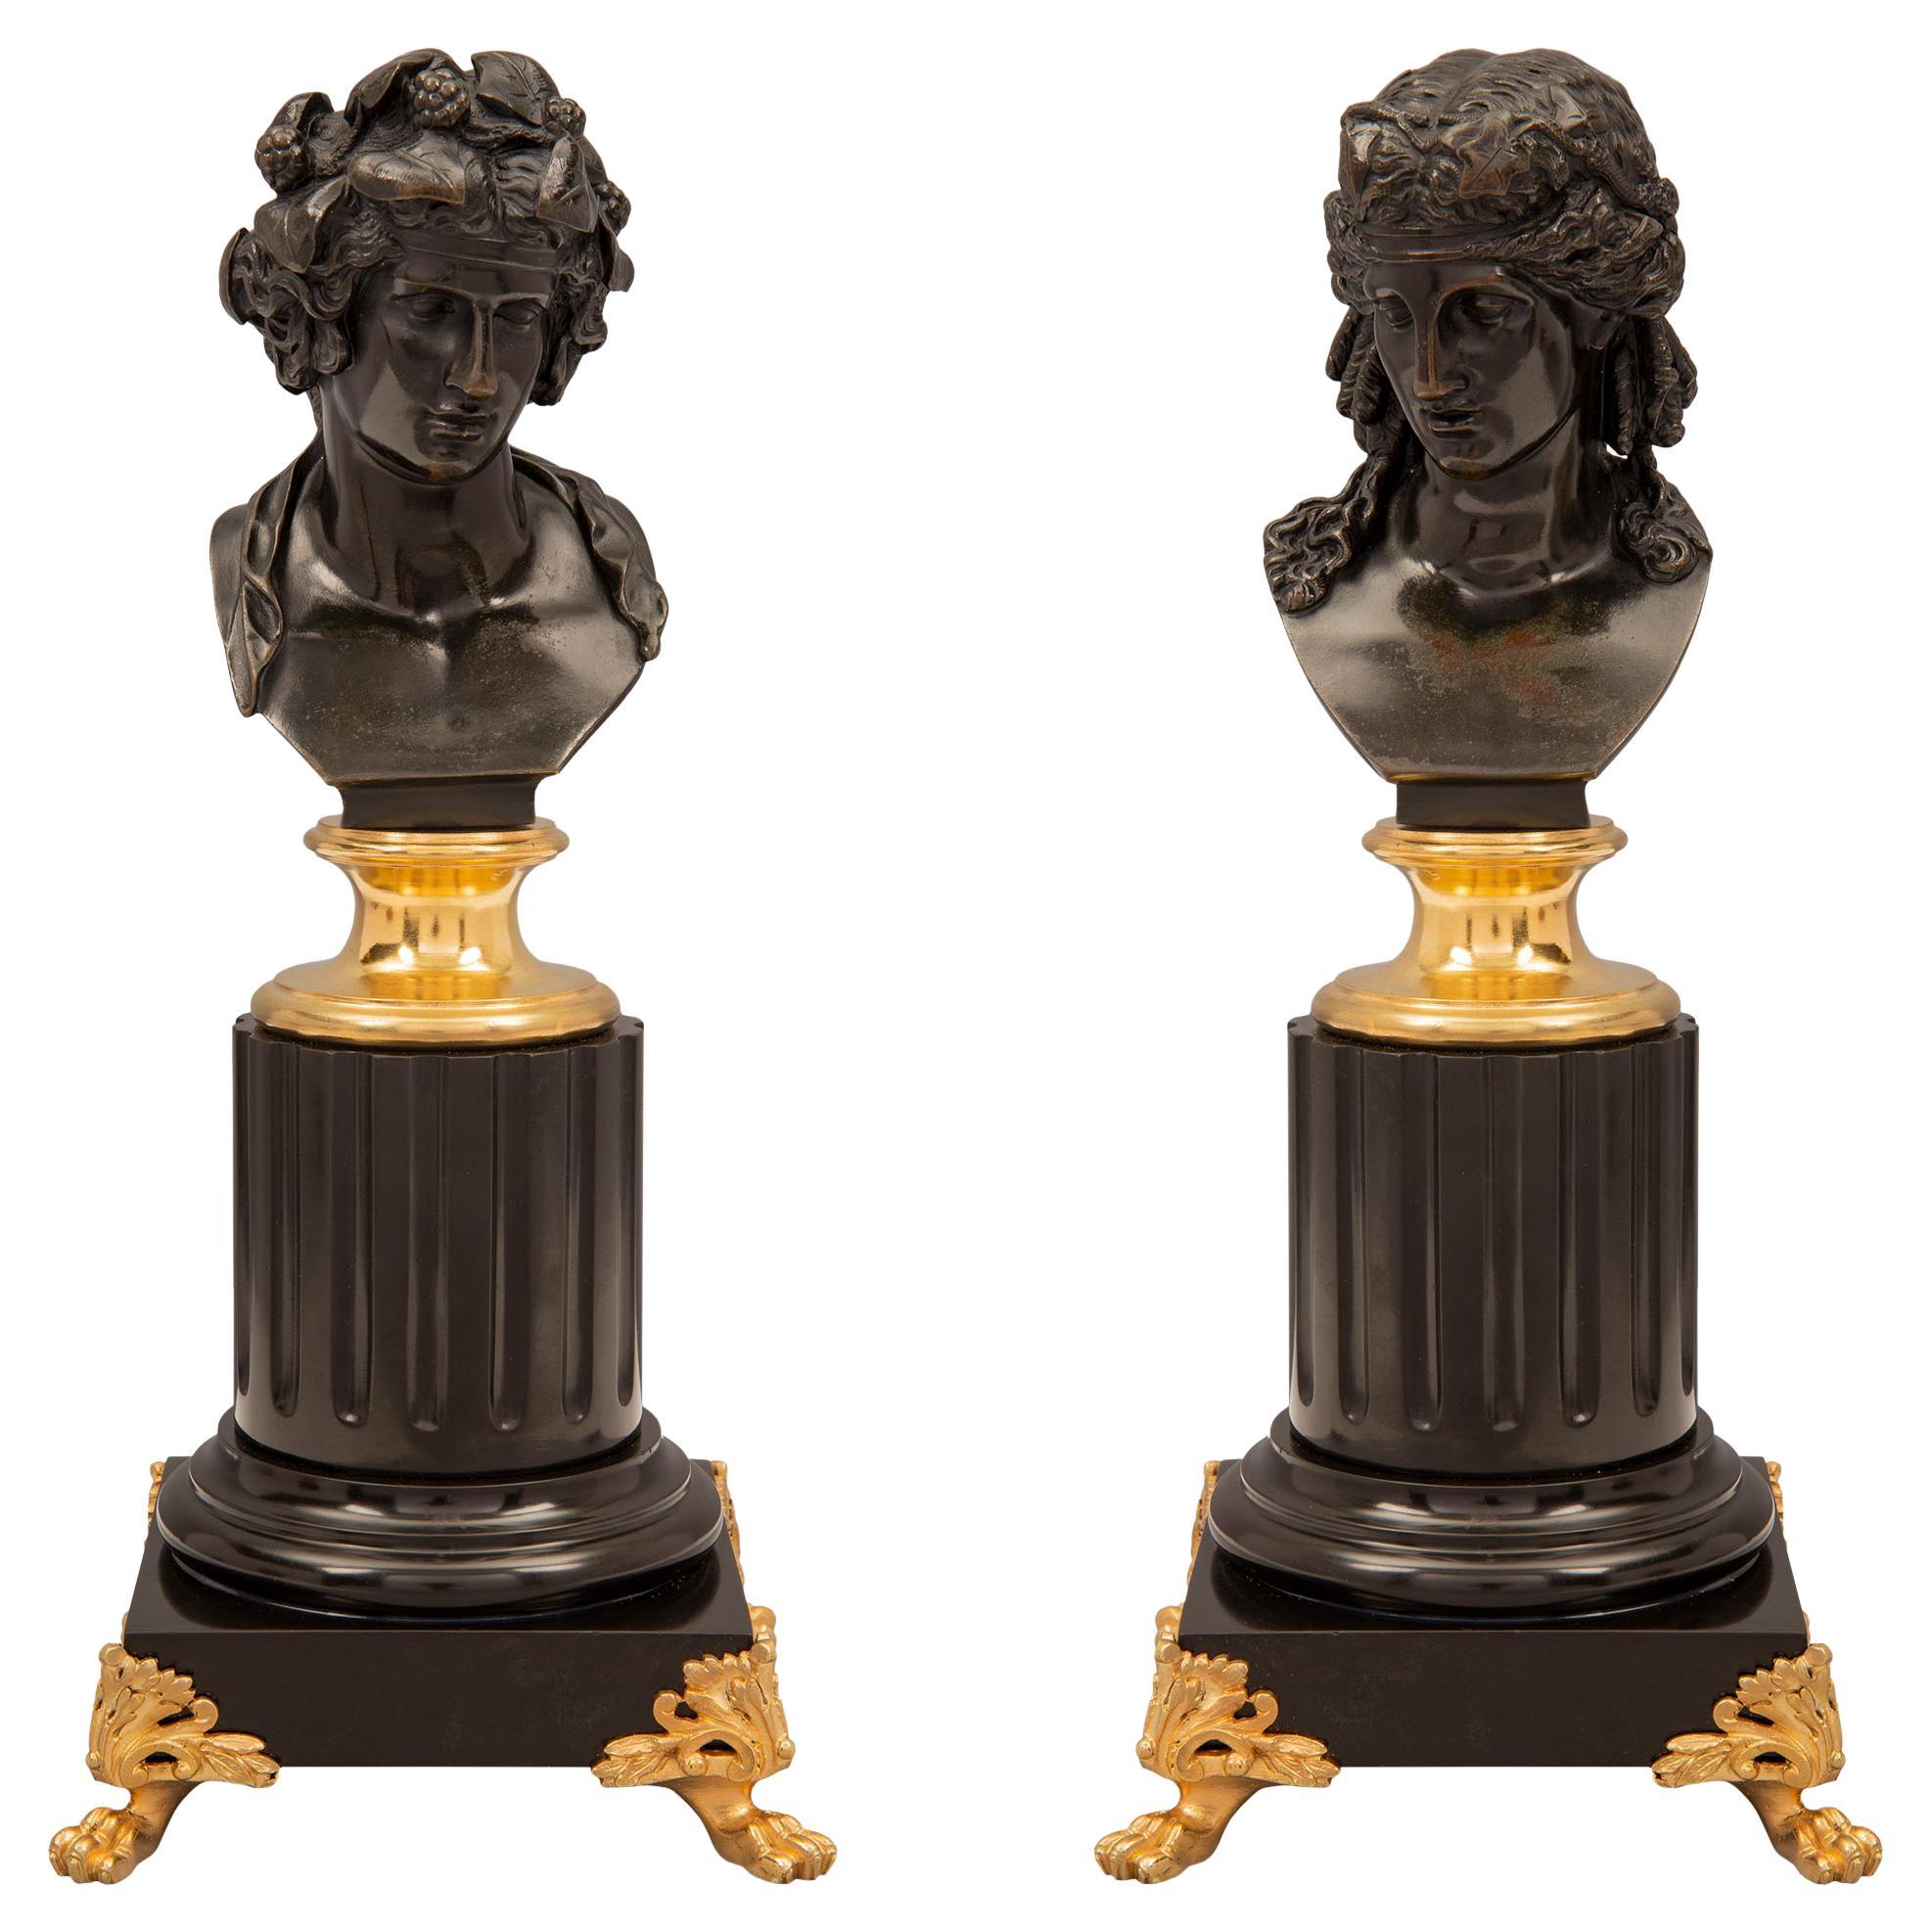 Pair of French 19th Century Louis XVI Style Bronze, Ormolu and Marble Statuettes